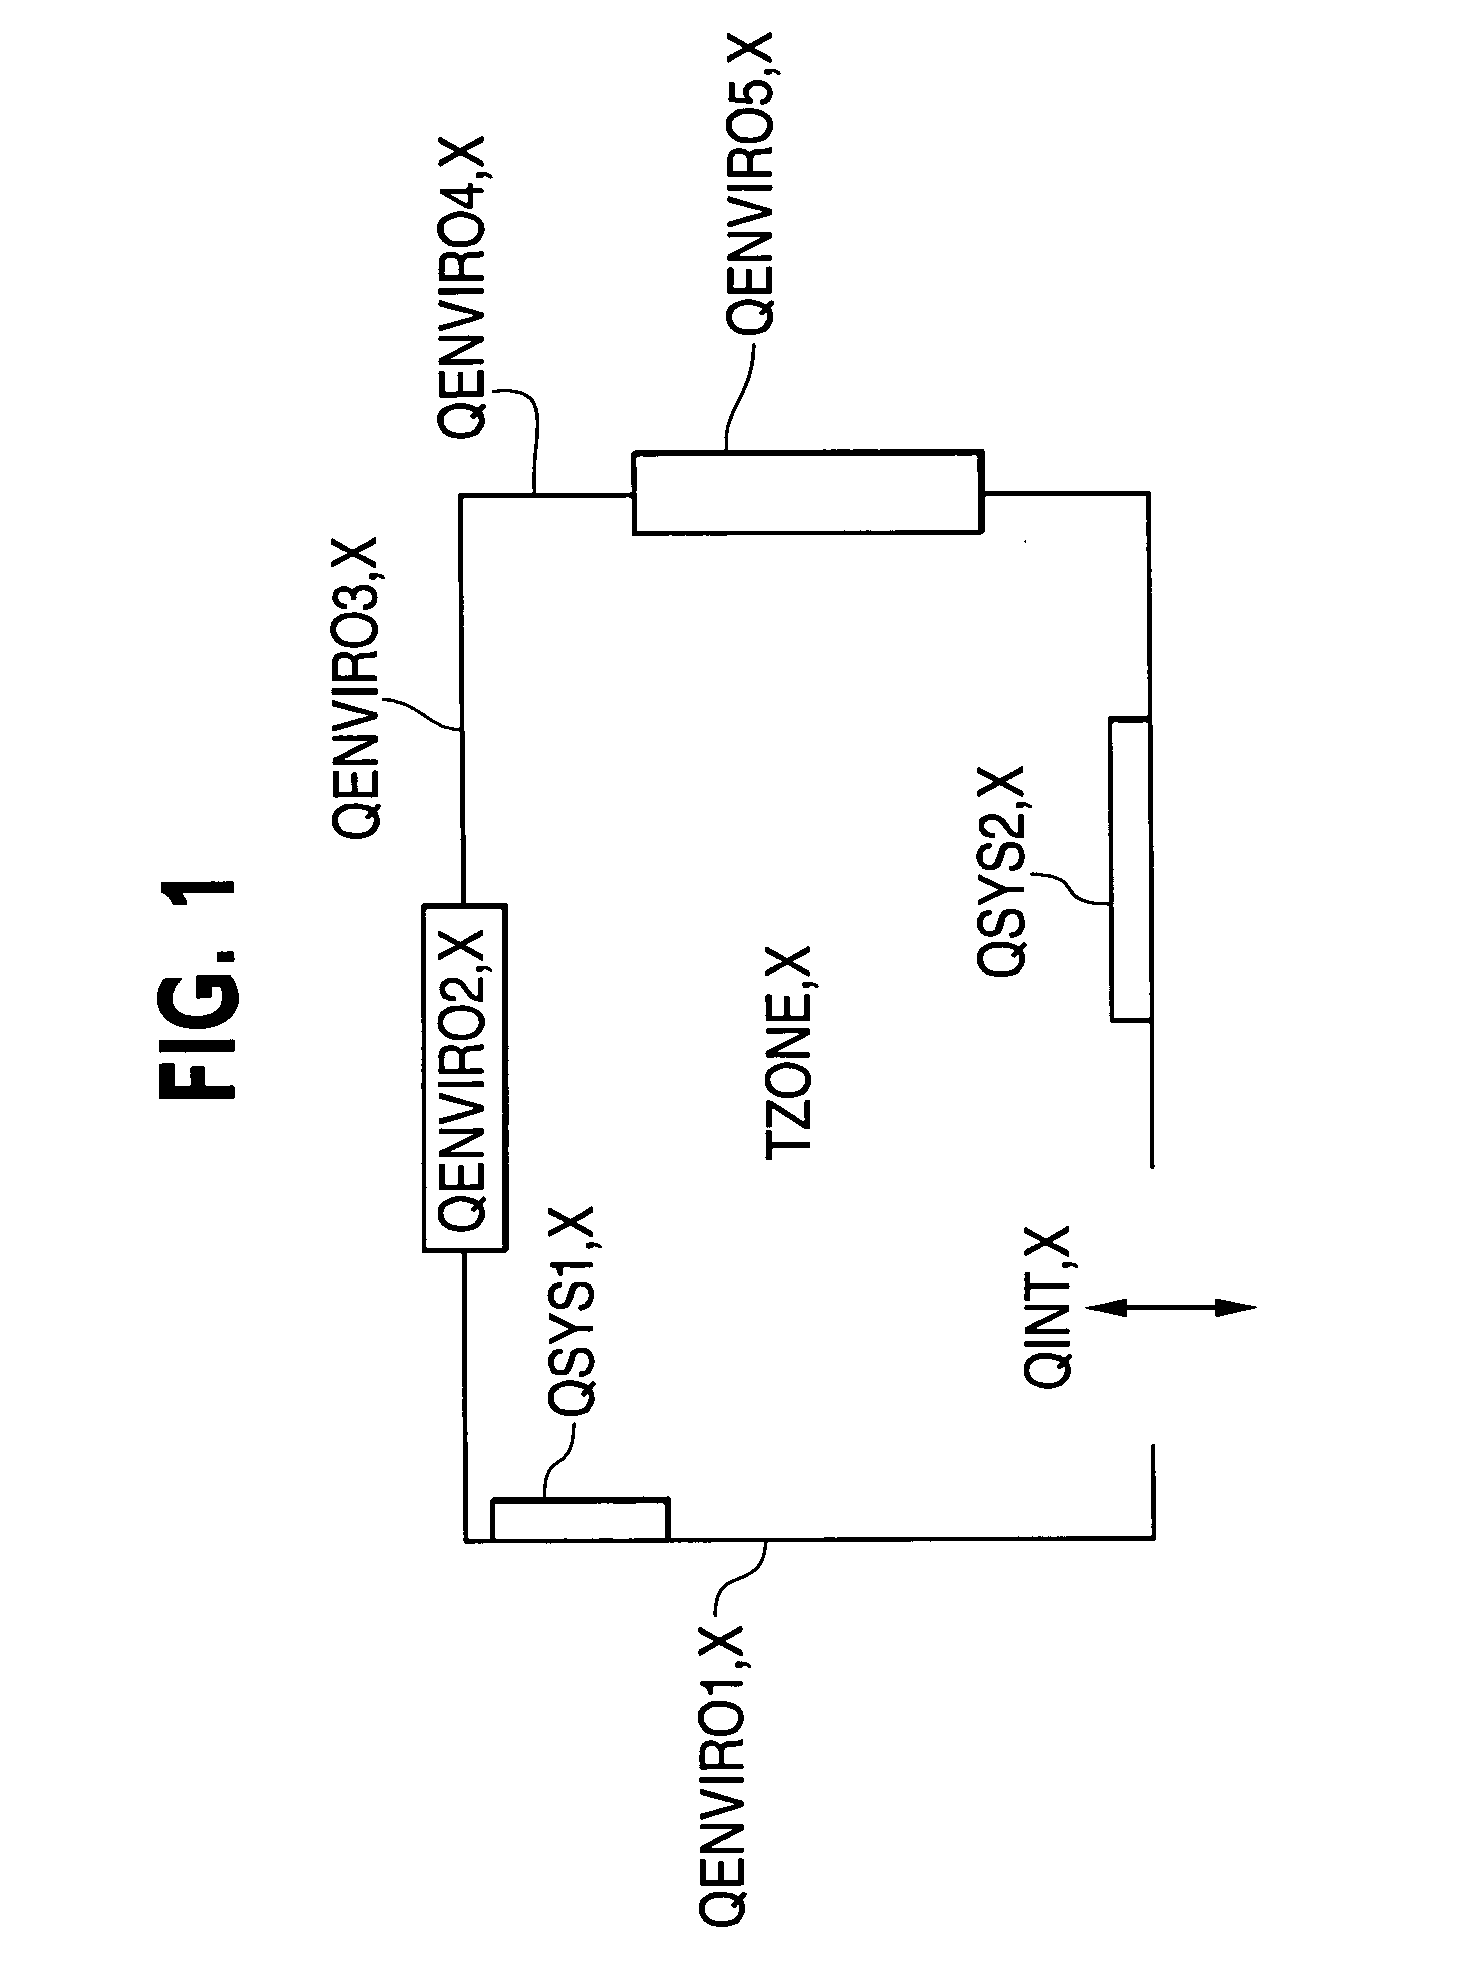 Control system and method for environmental systems